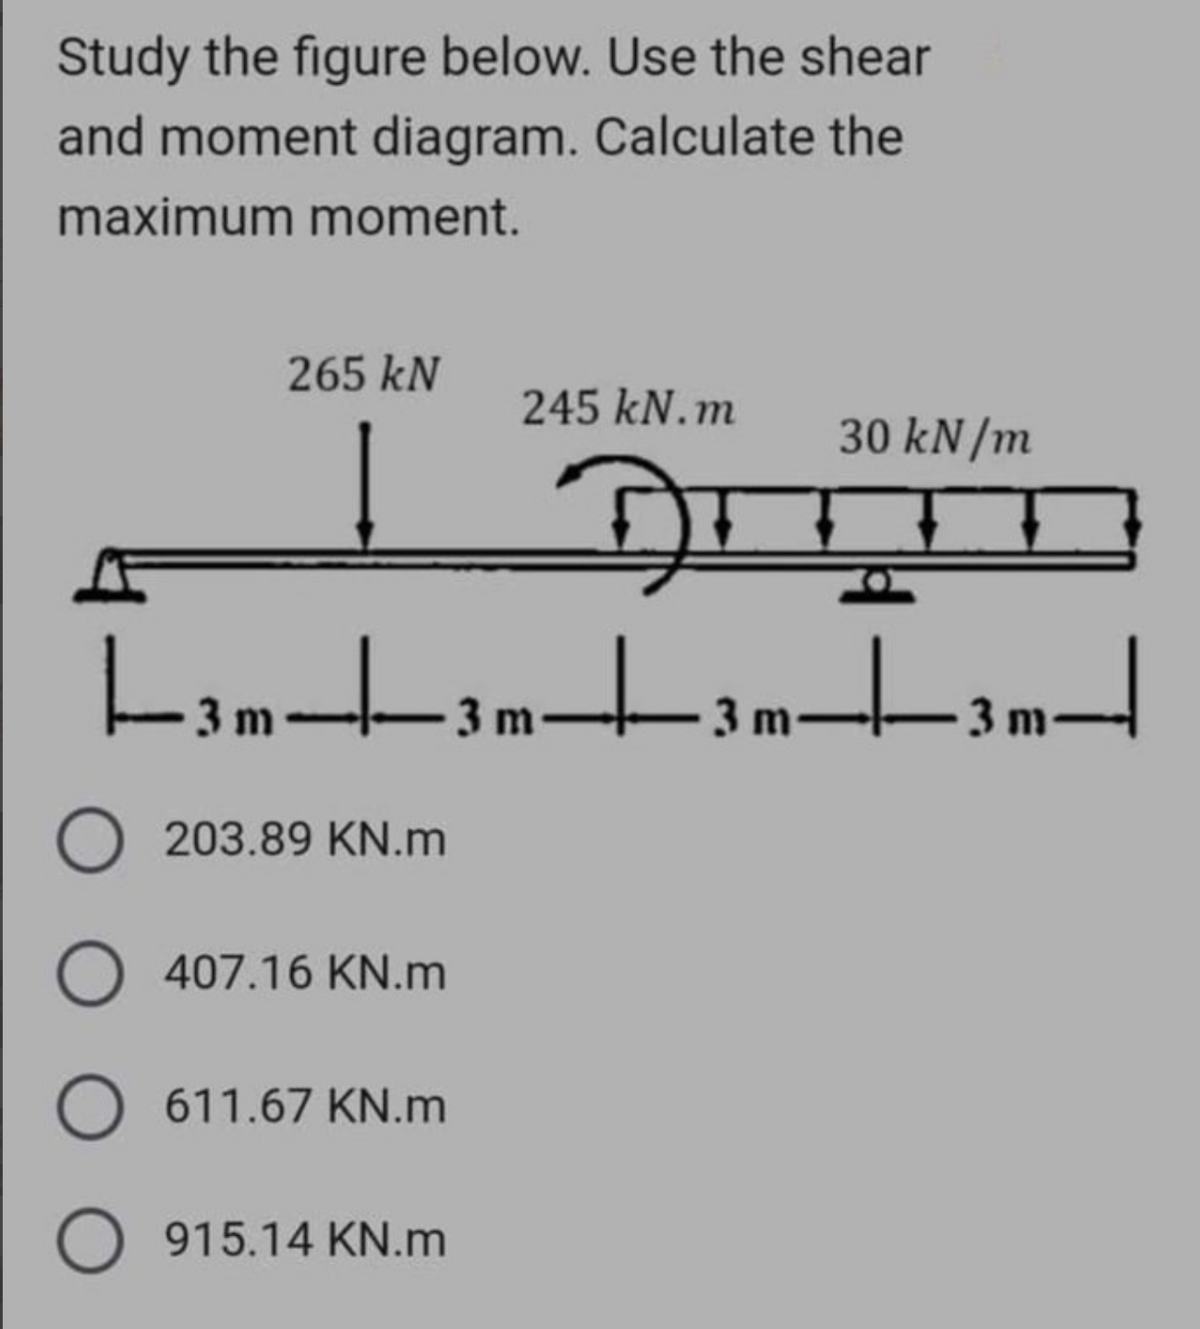 Study the figure below. Use the shear
and moment diagram. Calculate the
maximum moment.
265 kN
245 kN.m
DI
|--3m-|-—-3 m-———-3 m²
O203.89 KN.m
O 407.16 KN.m
O 611.67 KN.m
O 915.14 KN.m
30 kN/m
-_-_-_-3m-